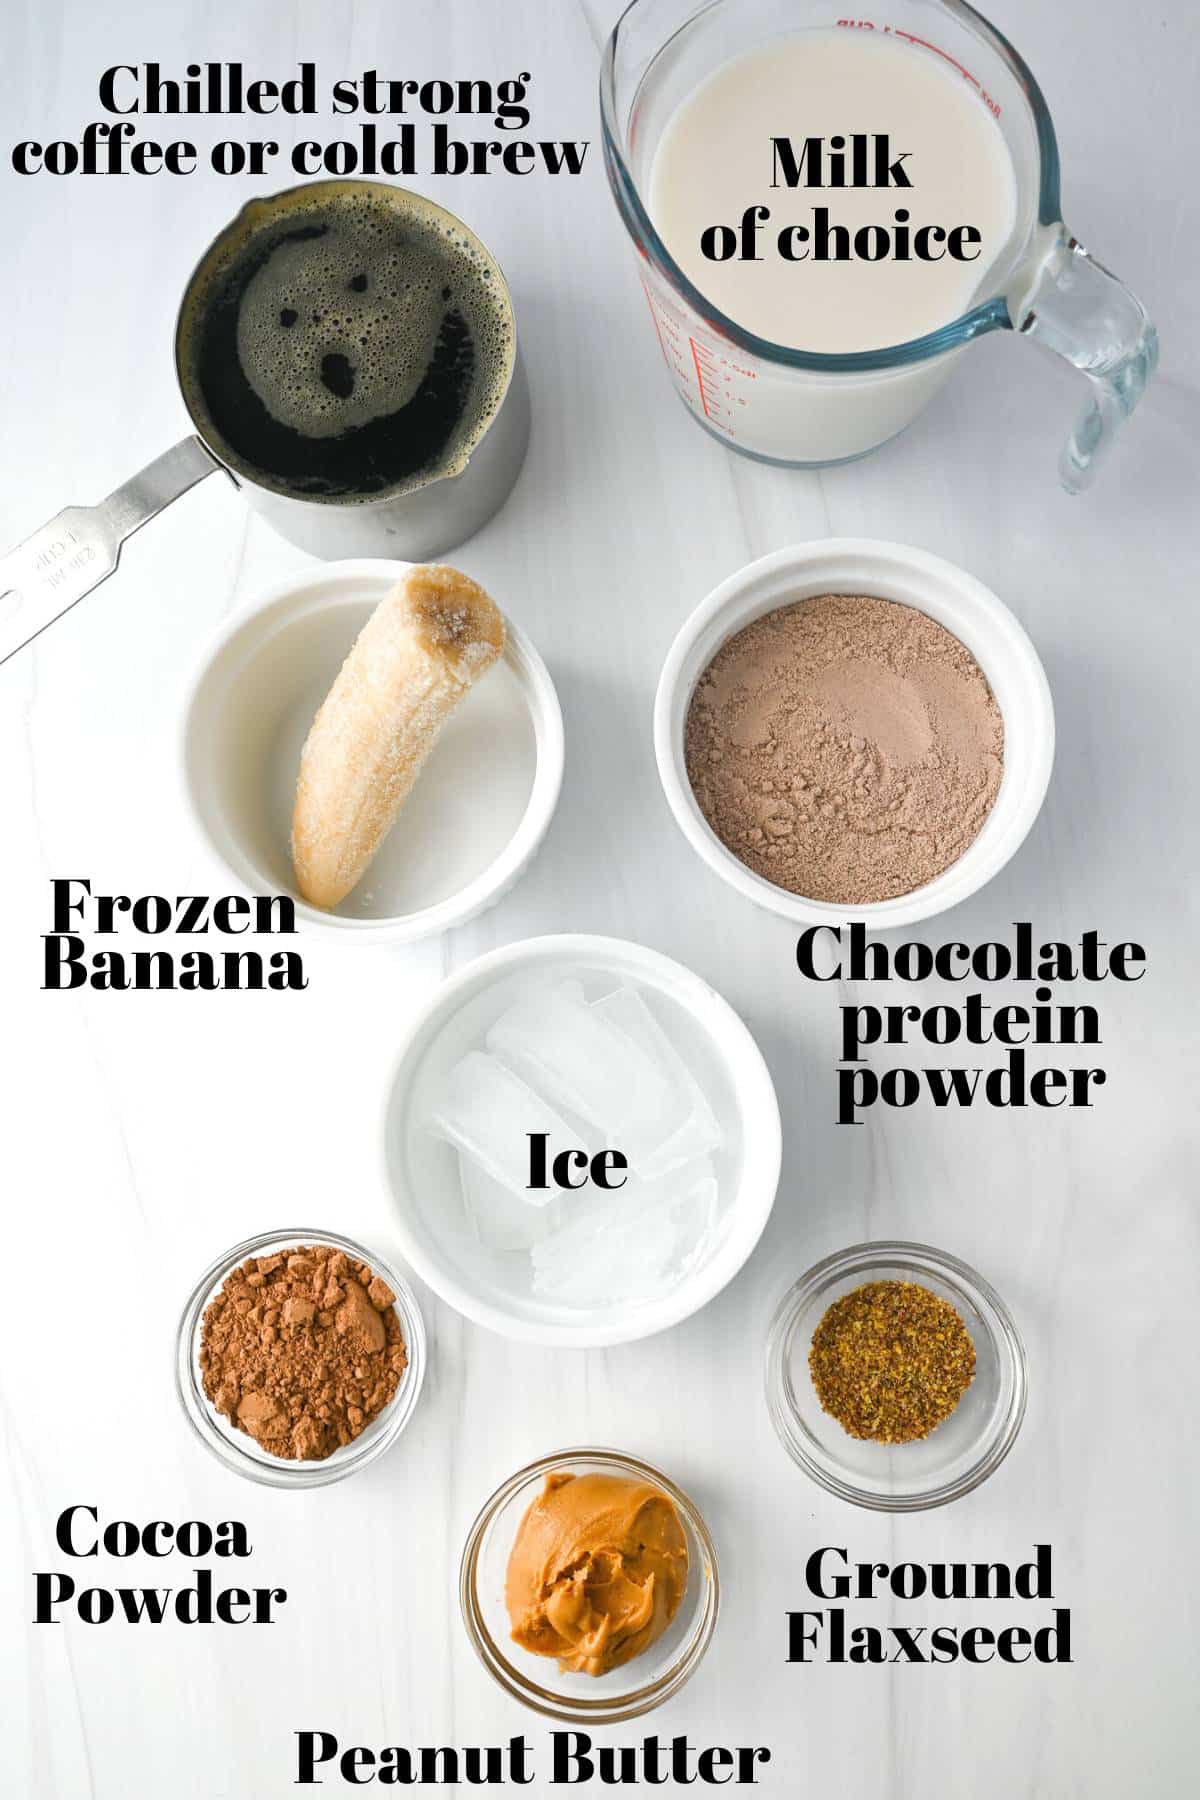 ingredients for a mocha protein shake measured out on a counter